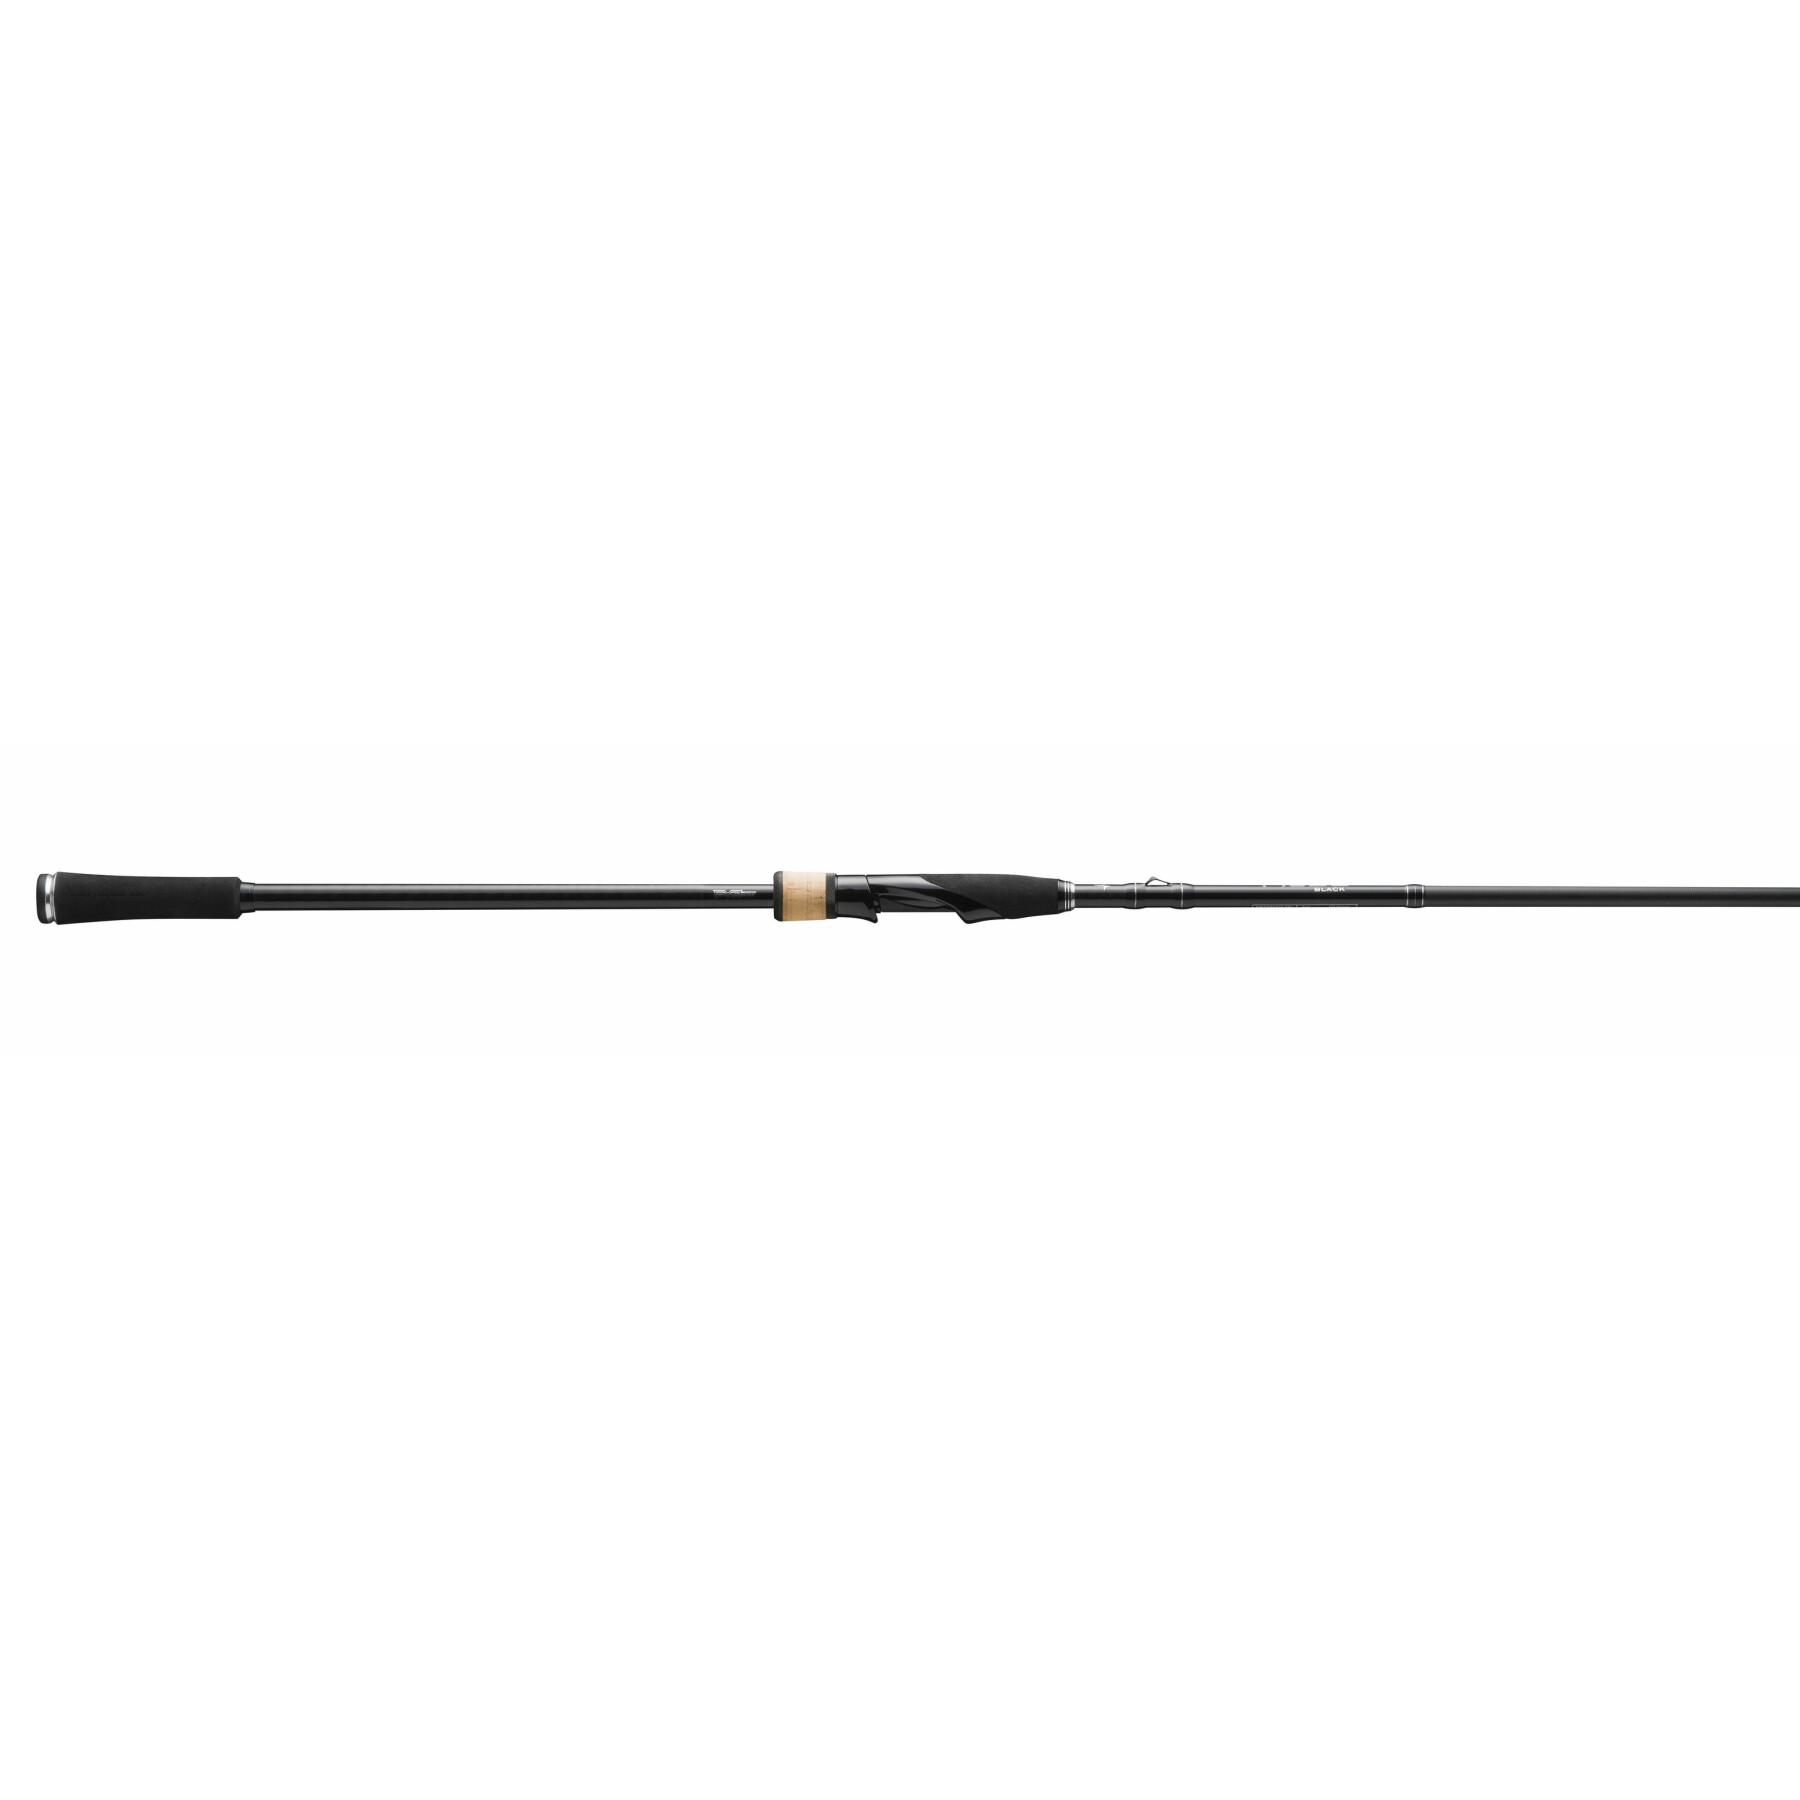 Spinning rod 13 Fishing Muse Spin 40-130g